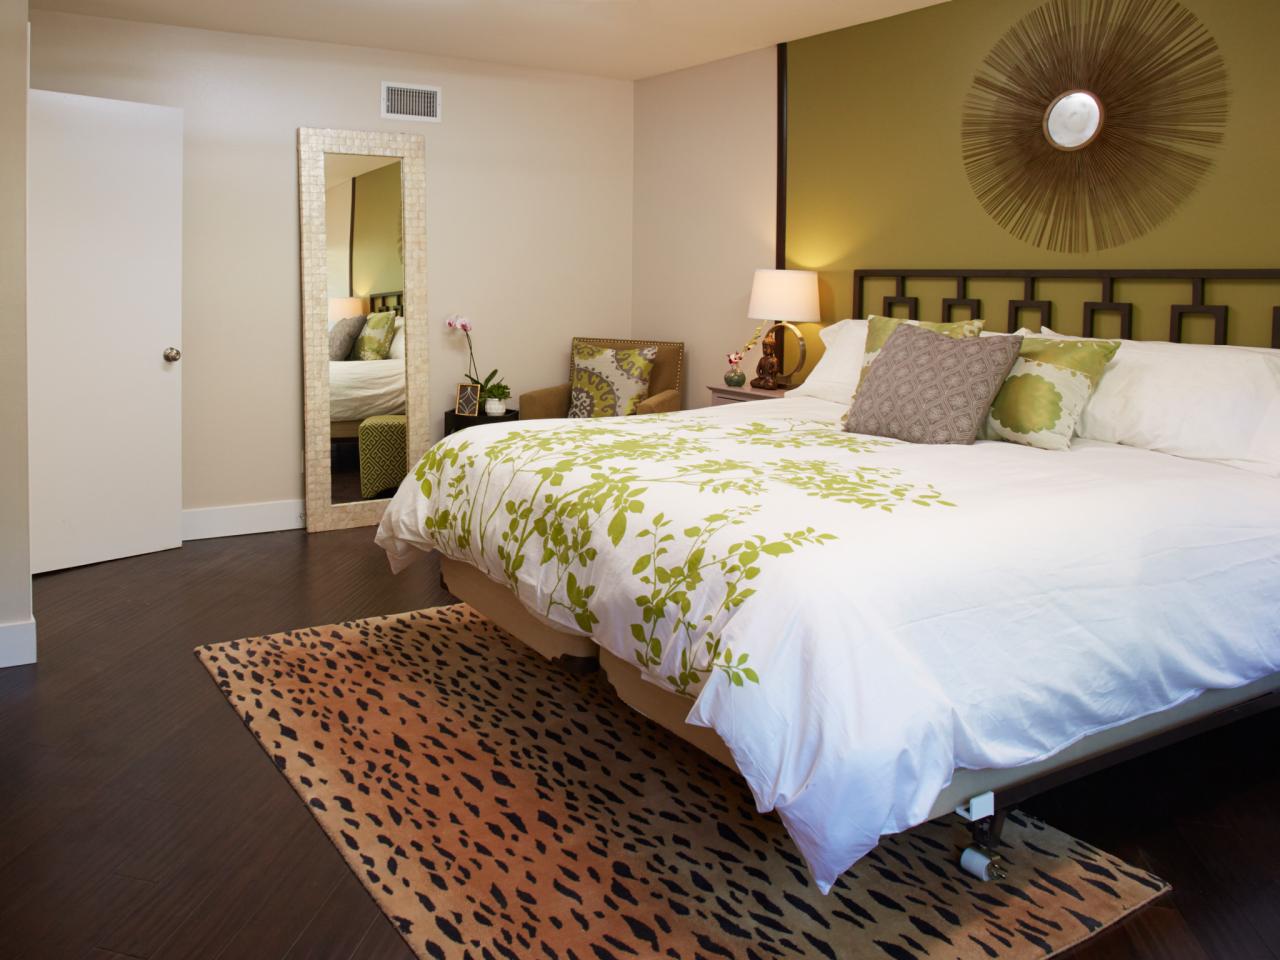 Decorating Master Bedroom With Bamboo Flooring